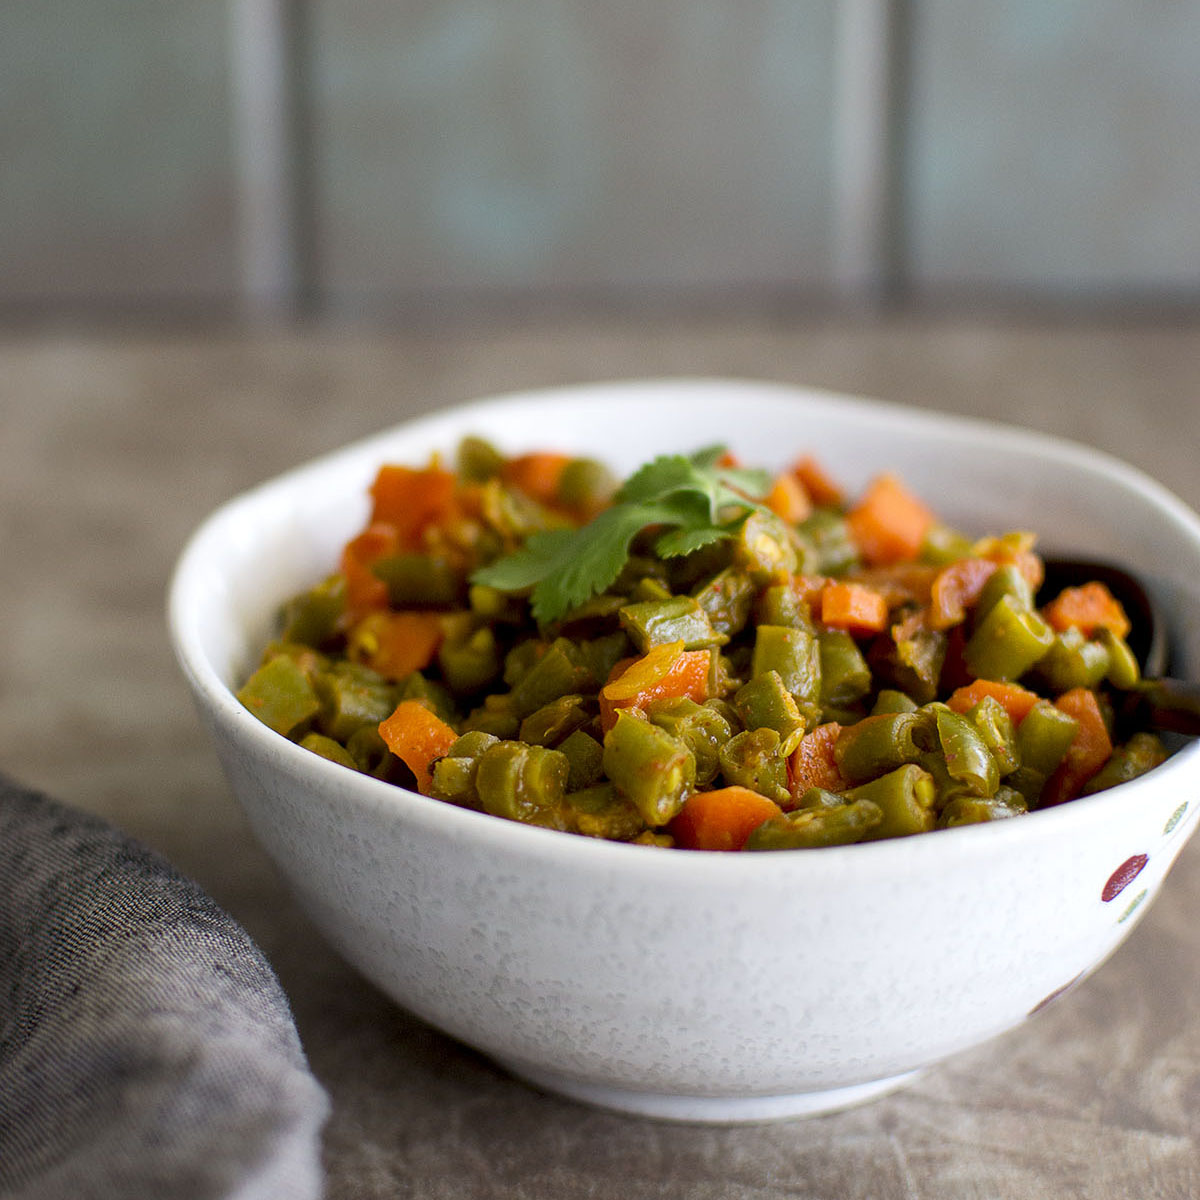 Gujarati-style carrot and cabbage stir-fry recipe